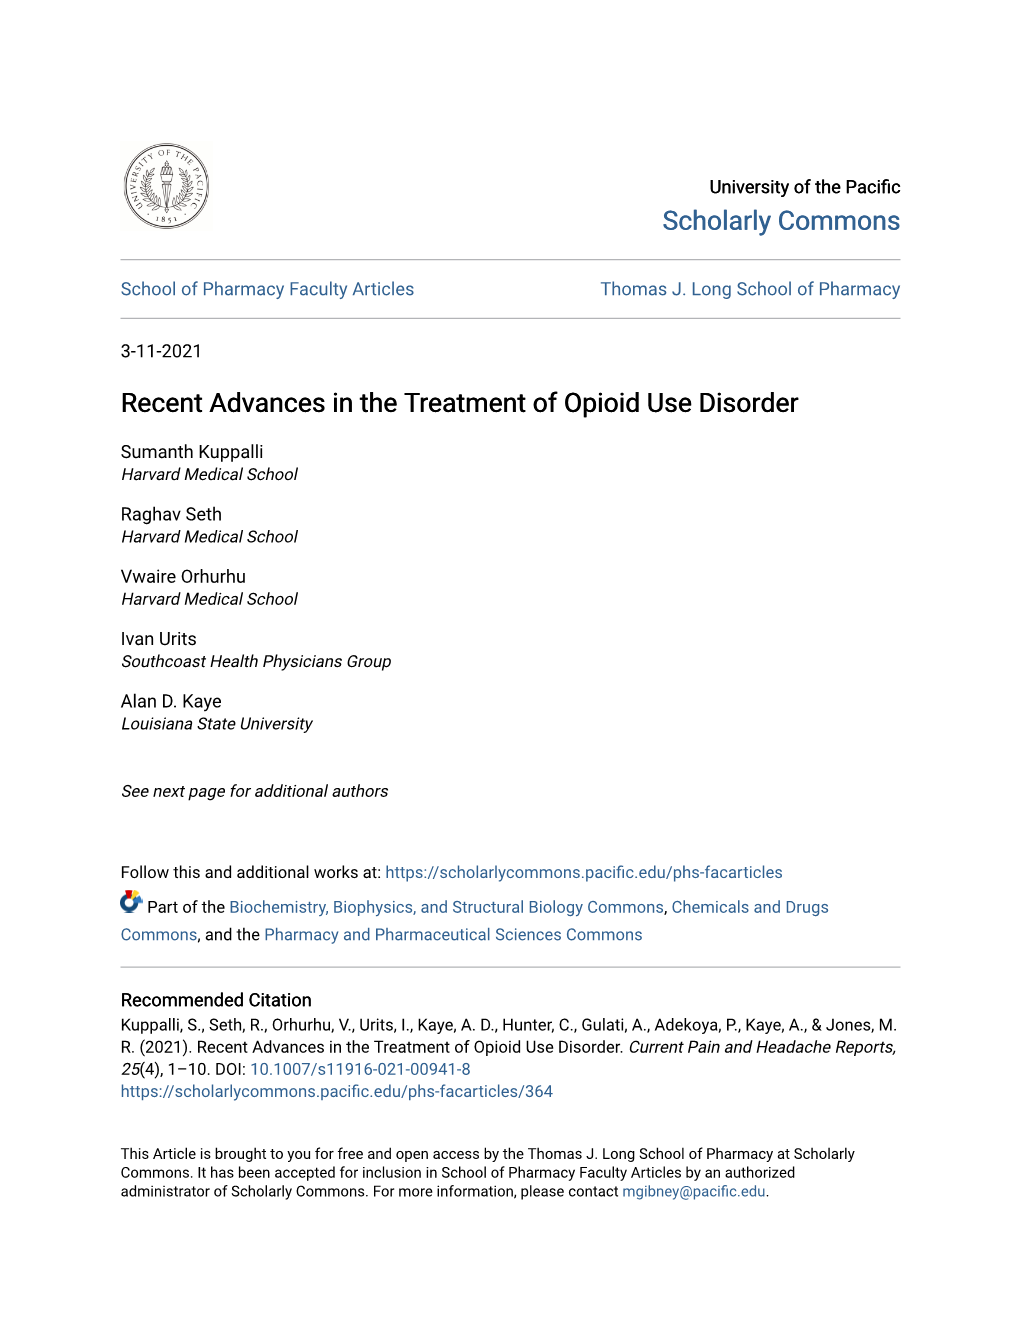 Recent Advances in the Treatment of Opioid Use Disorder